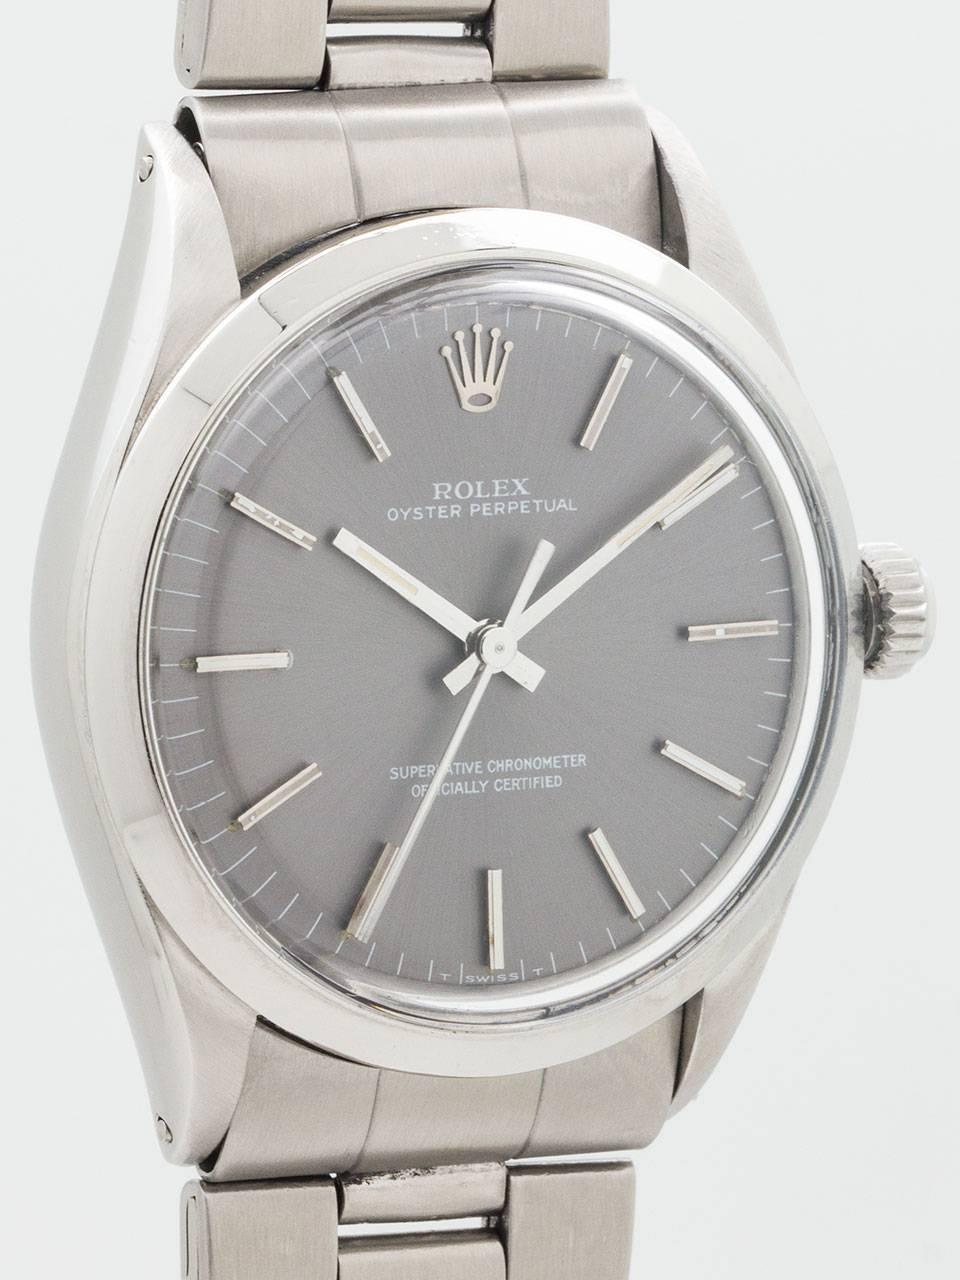 Vintage Rolex Oyster Perpetual ref 1002 serial number 2.1 million circa 1969. Featuring 34mm diameter stainless steel case with smooth bezel and acrylic crystal. Original scarce gray dial with applied silver indexes and silver baton hands. Powered